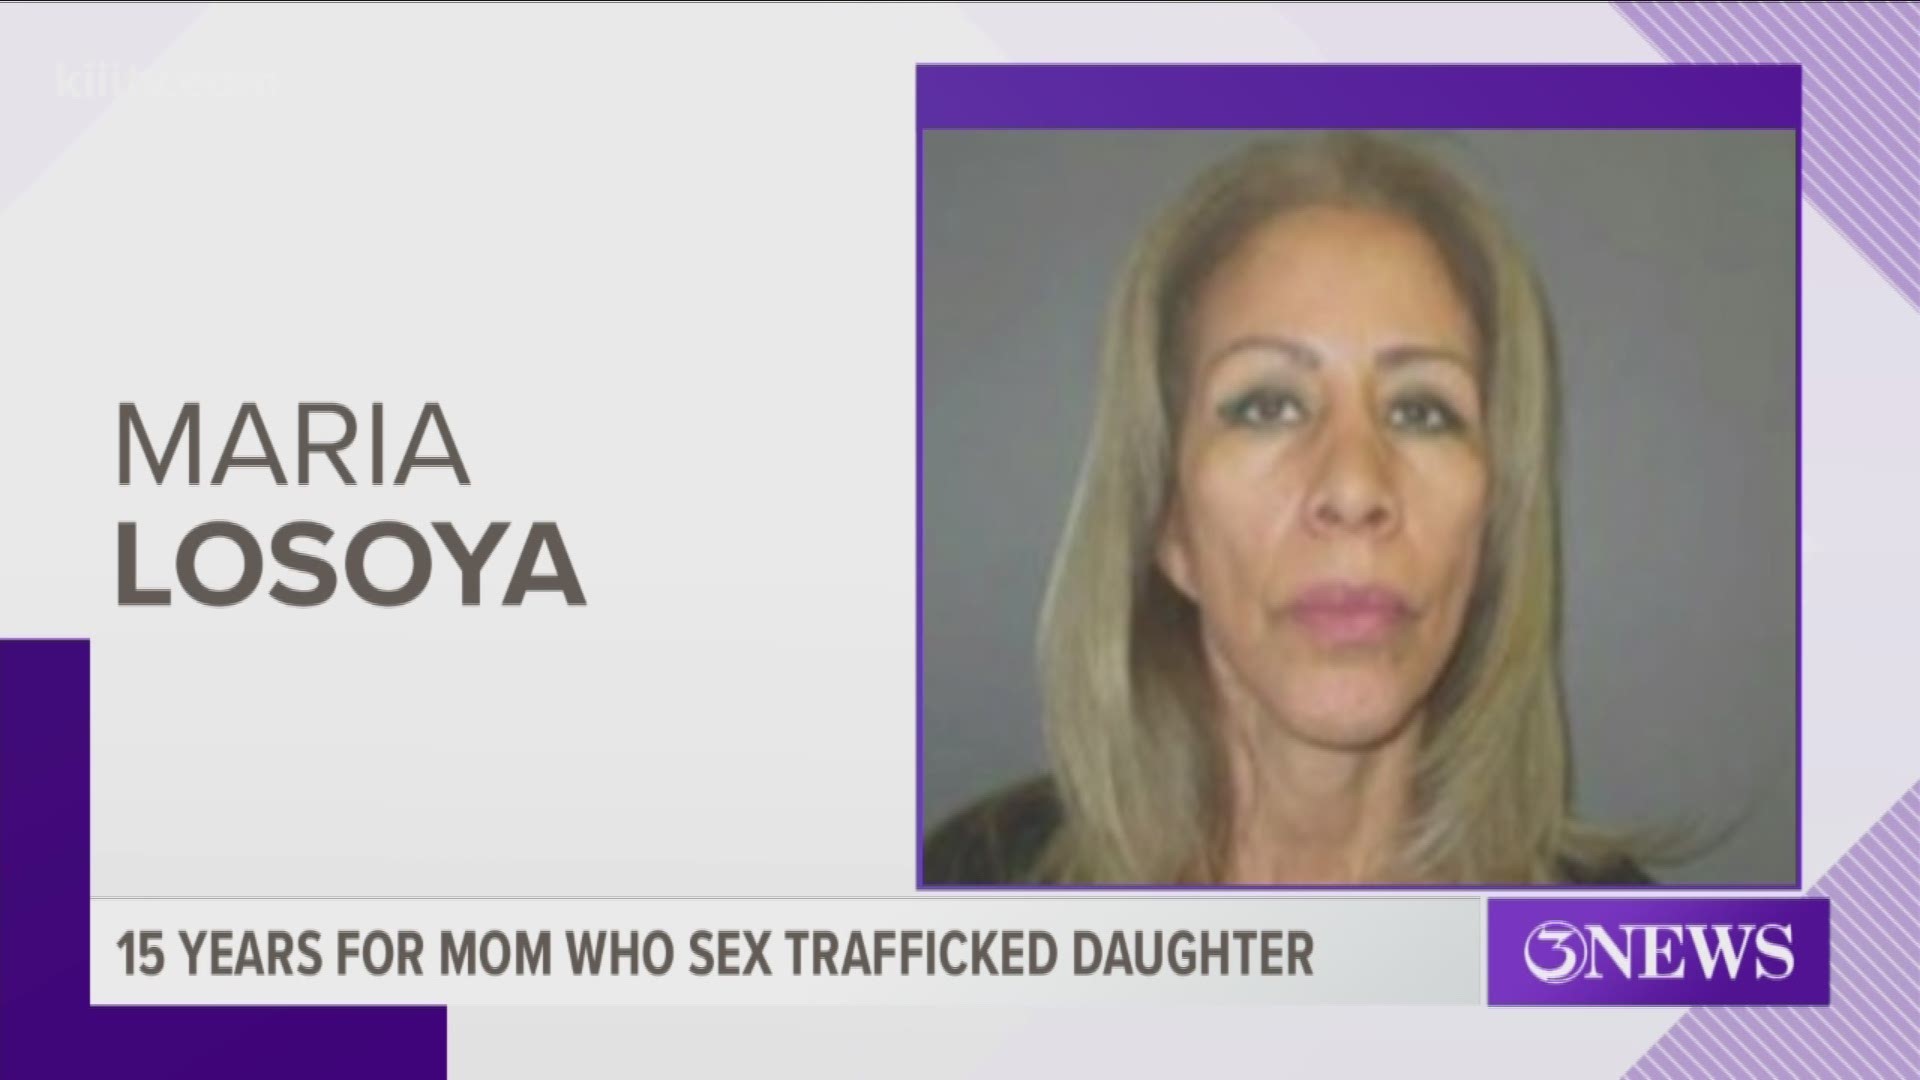 A Brownsville woman convicted of sex trafficking her 10-year-old daughter to a Rockport businessman back in 2012 has been sentenced to federal prison.